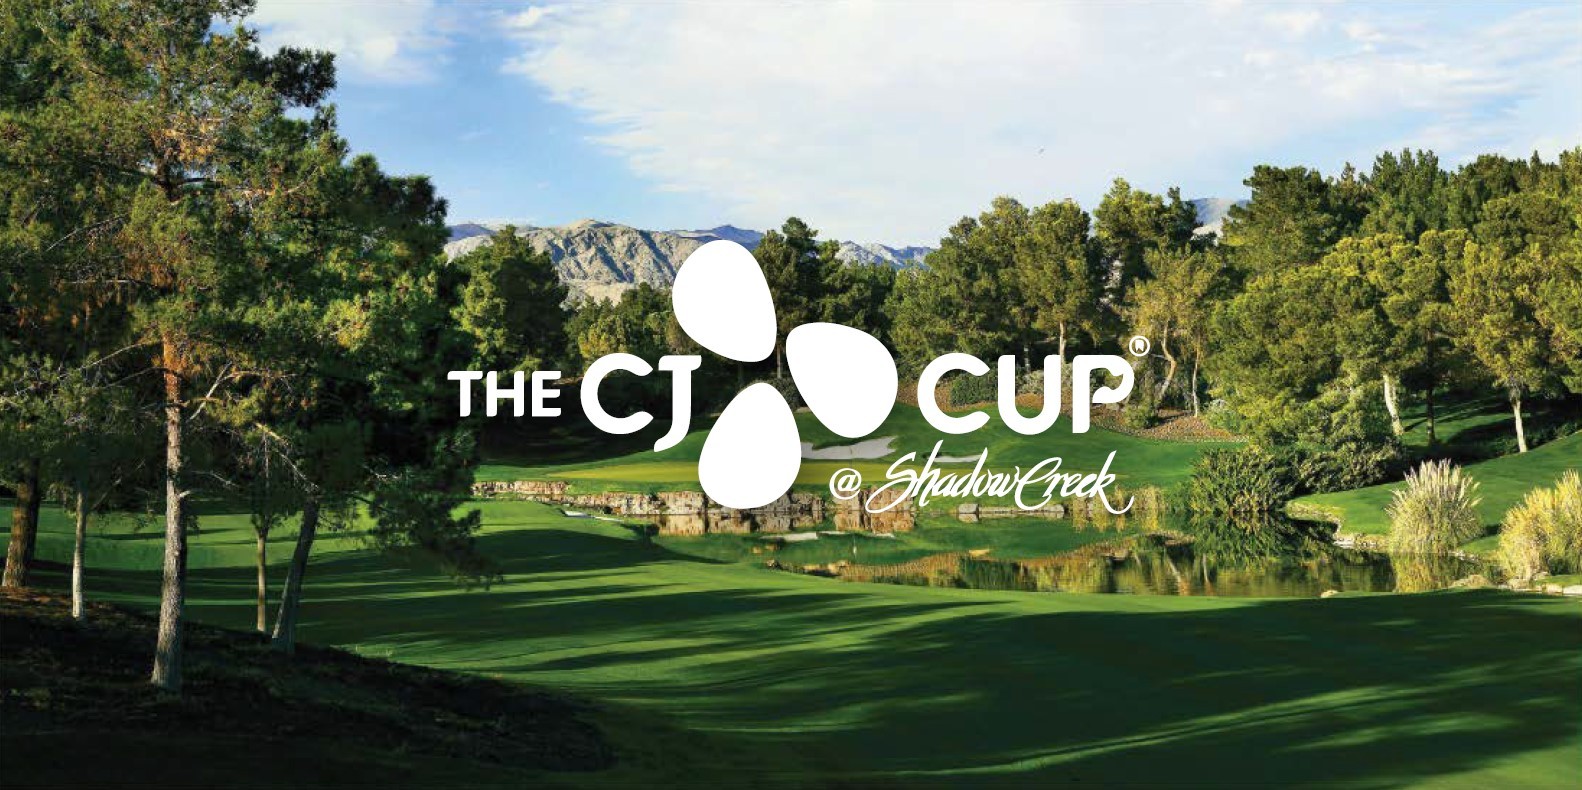 Korean Hospitality Takes Centerstage at the CJ CUP SHADOW CREEK in Las Vegas Business Wire